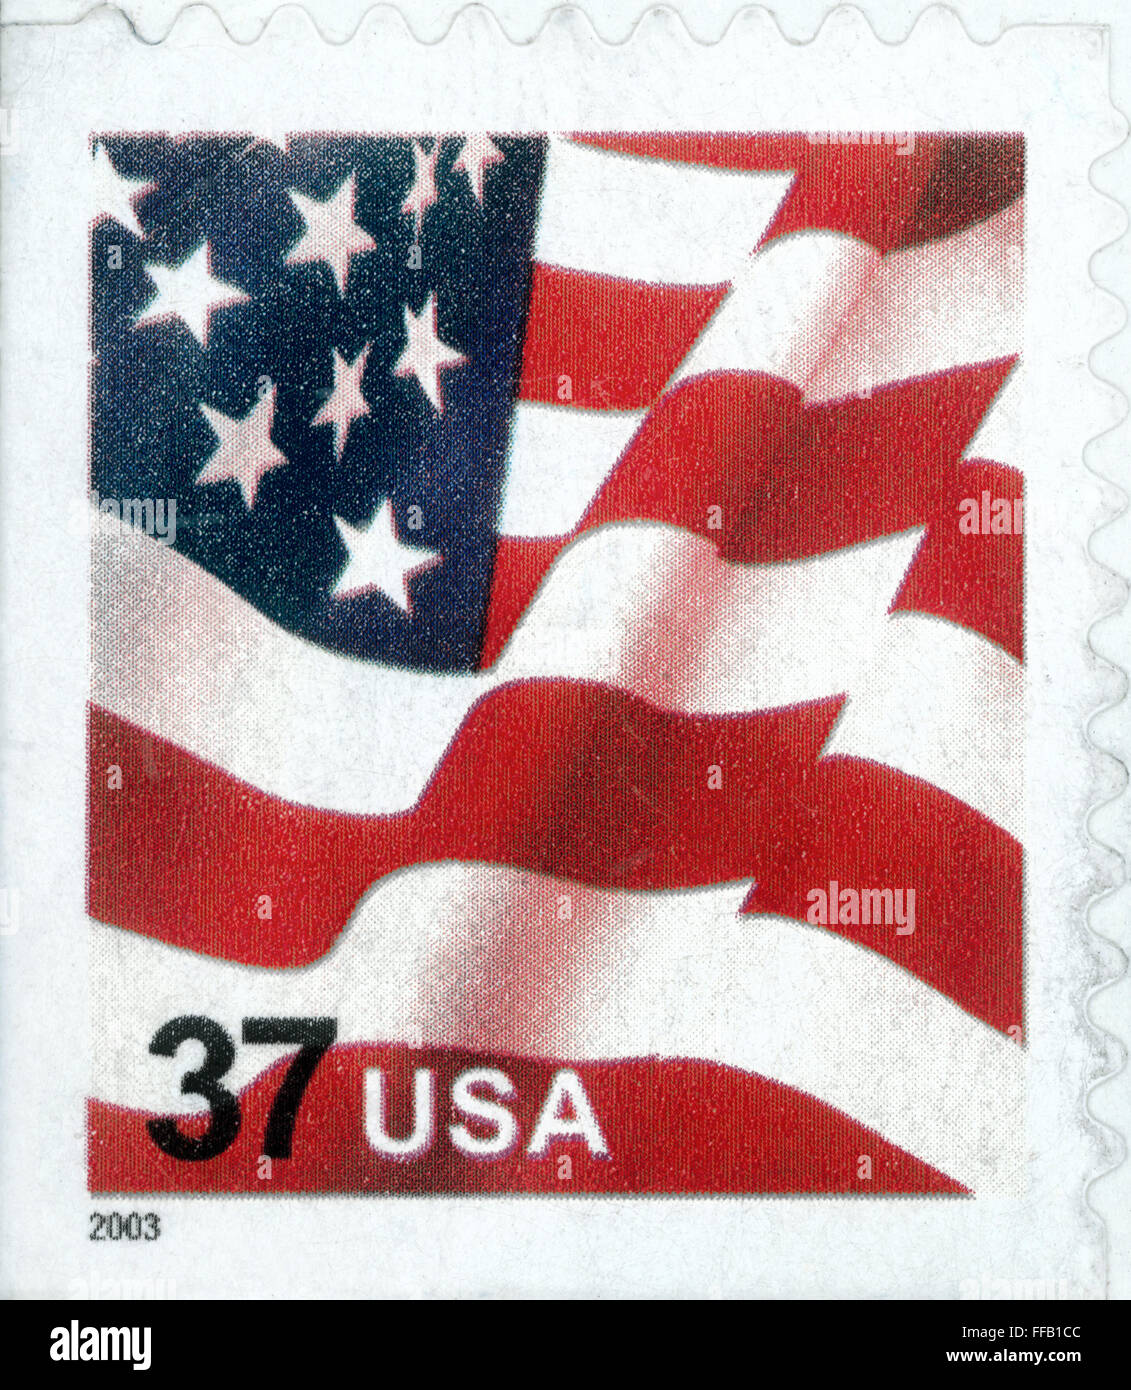 U.S. POSTAGE STAMP, 2003. /nA 37-cent U.S. postage stamp, issued in 2003. Stock Photo